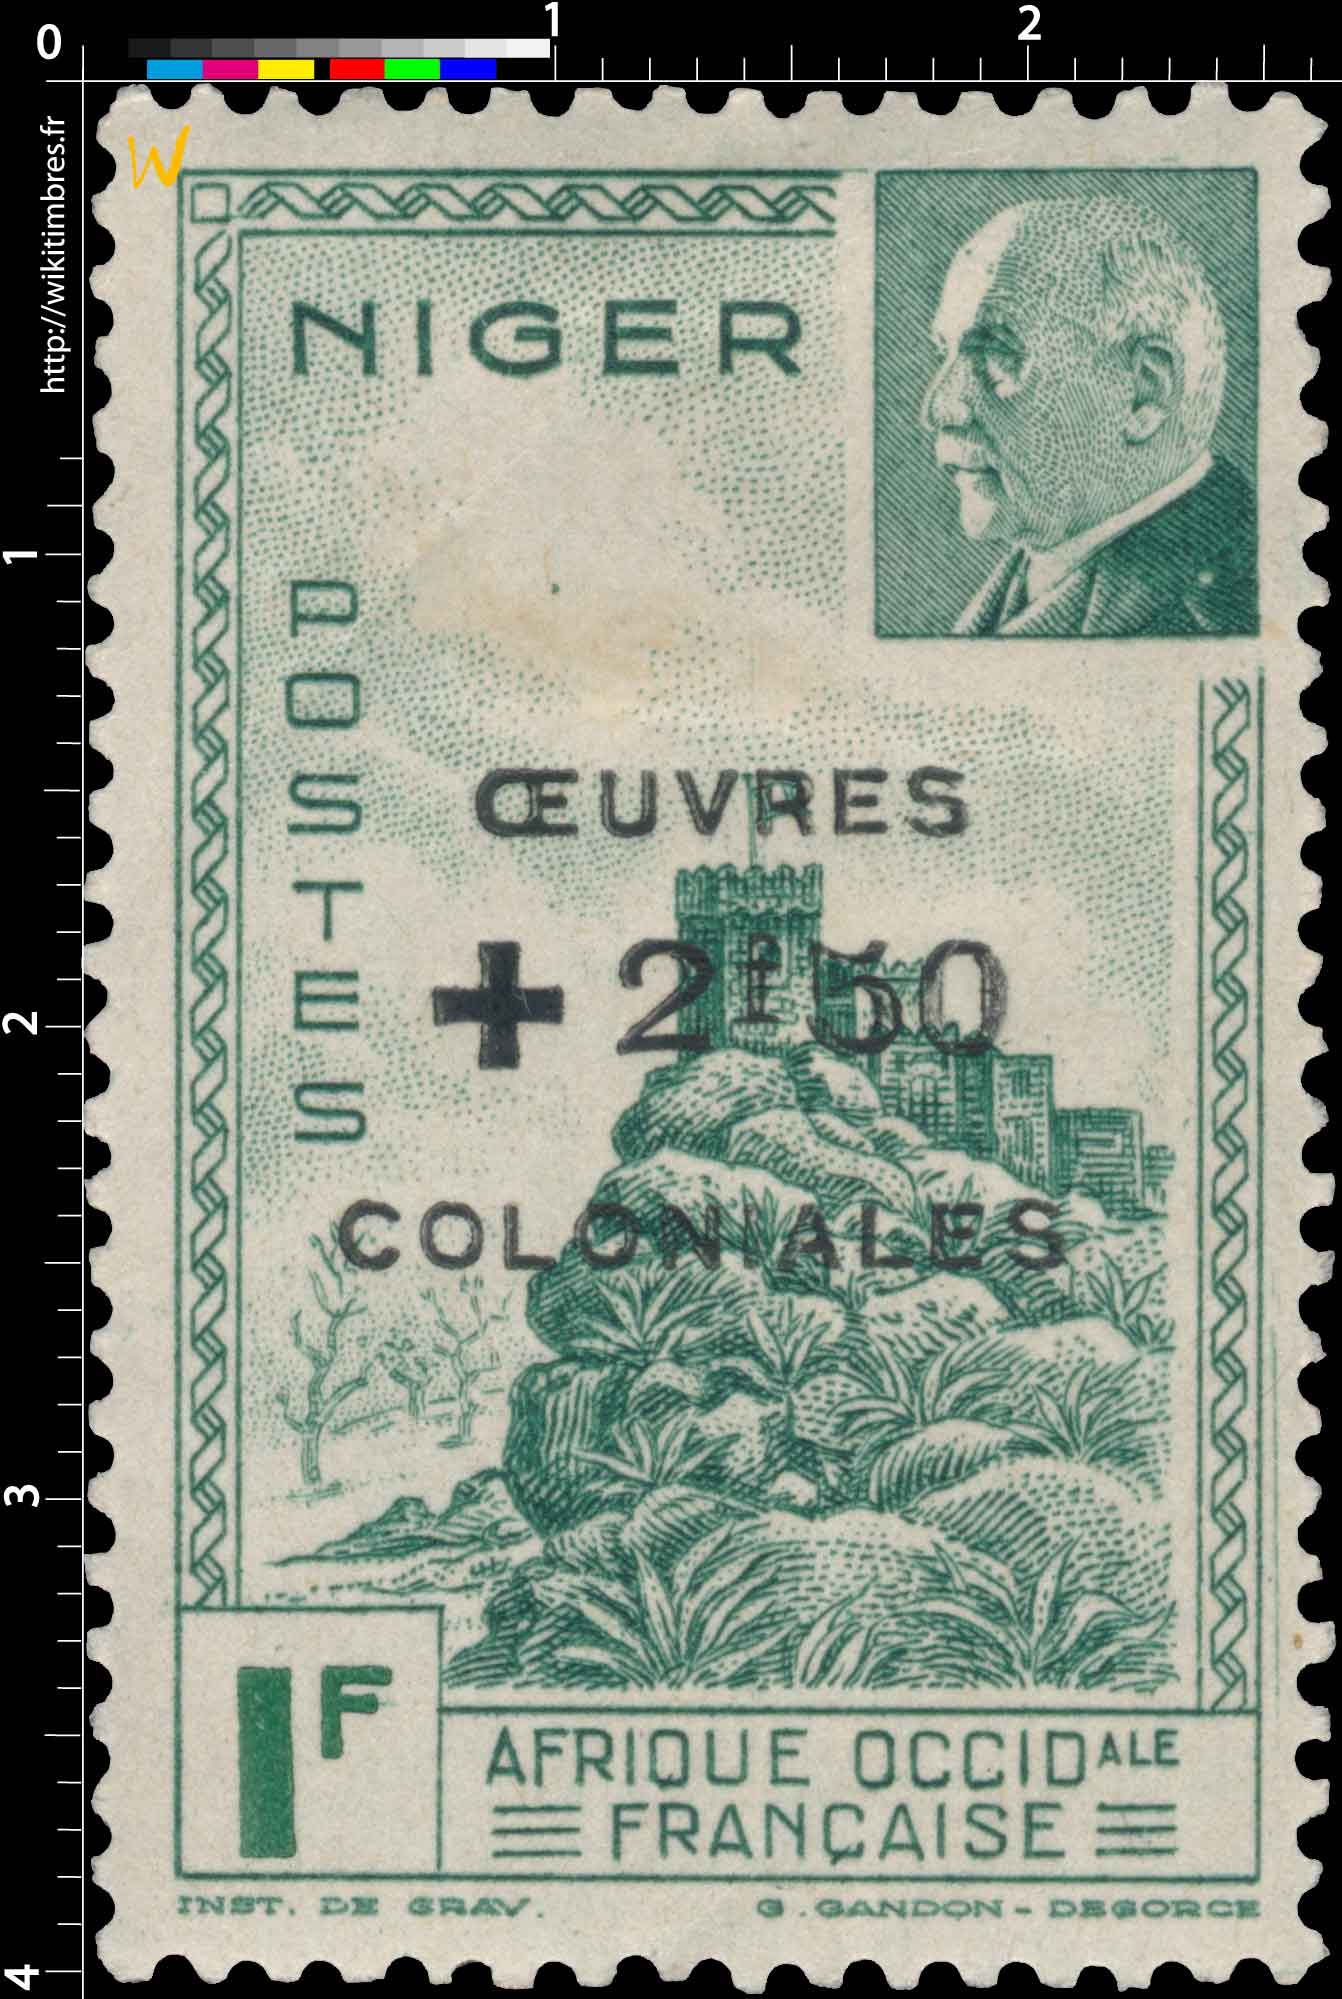  Afrique occidentale française - Niger - Oeuvres Coloniales